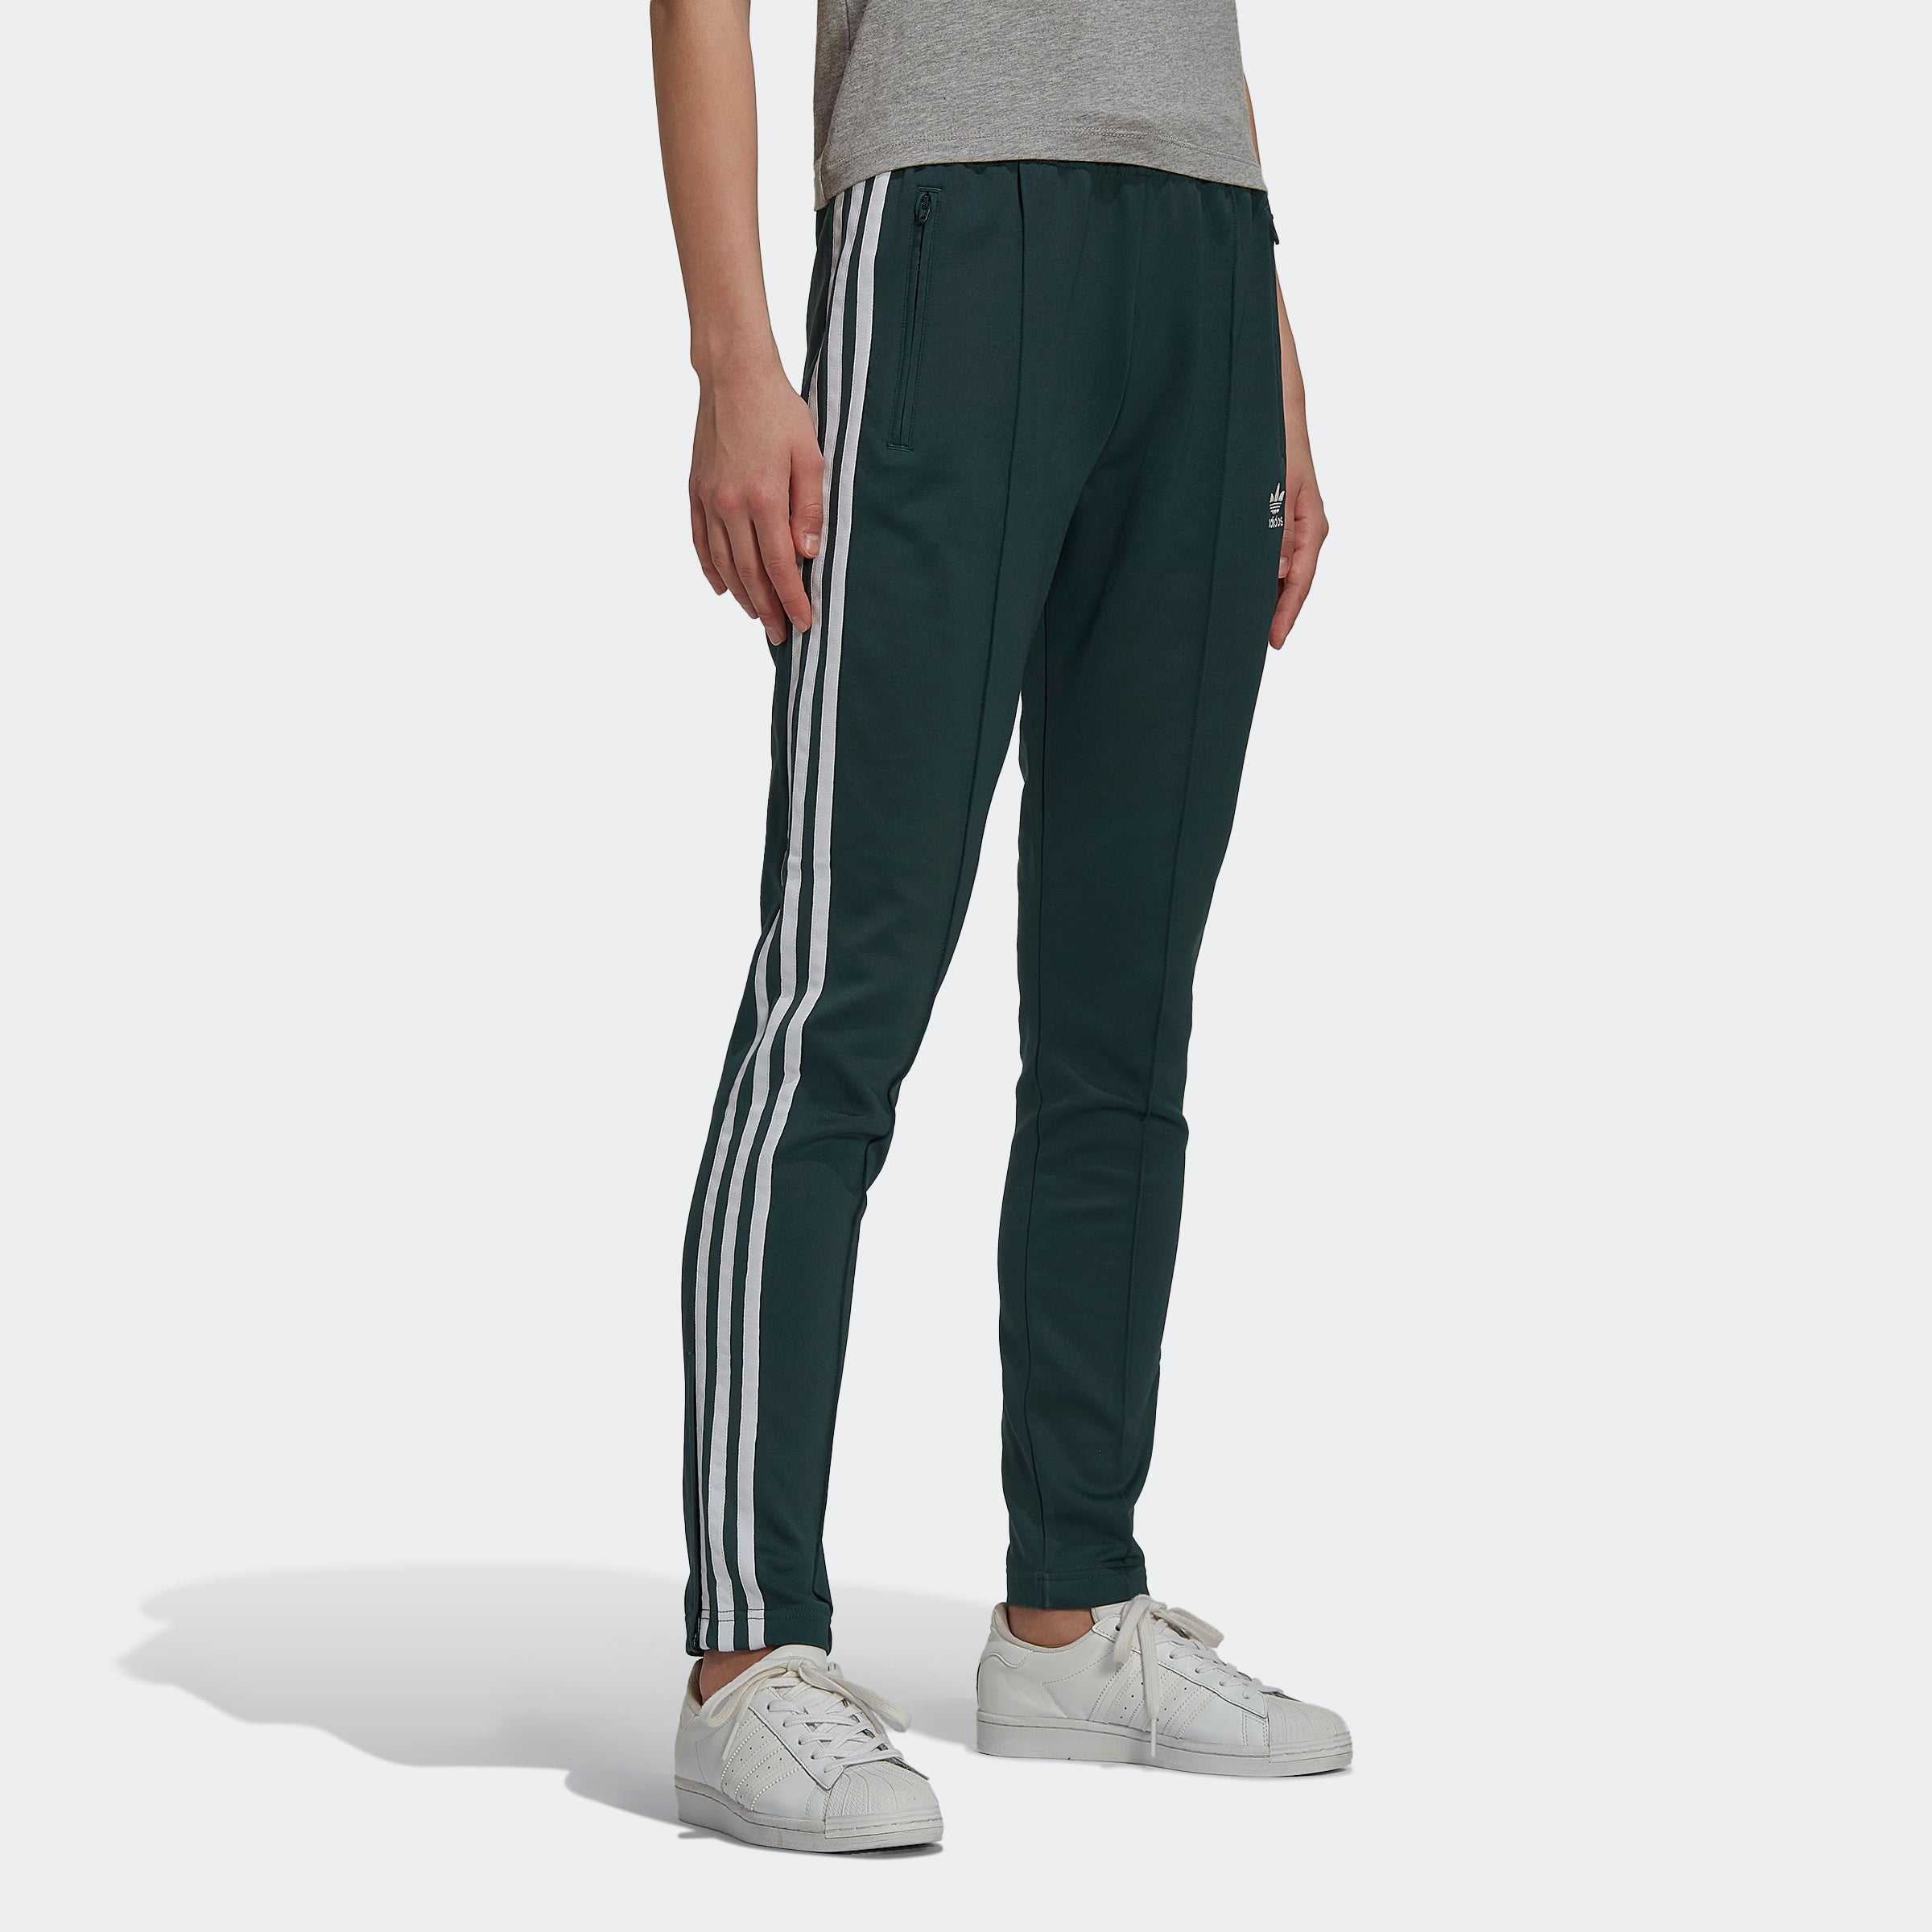 SST Mineral Chicago Sports Green Track Pants adidas Women\'s City |